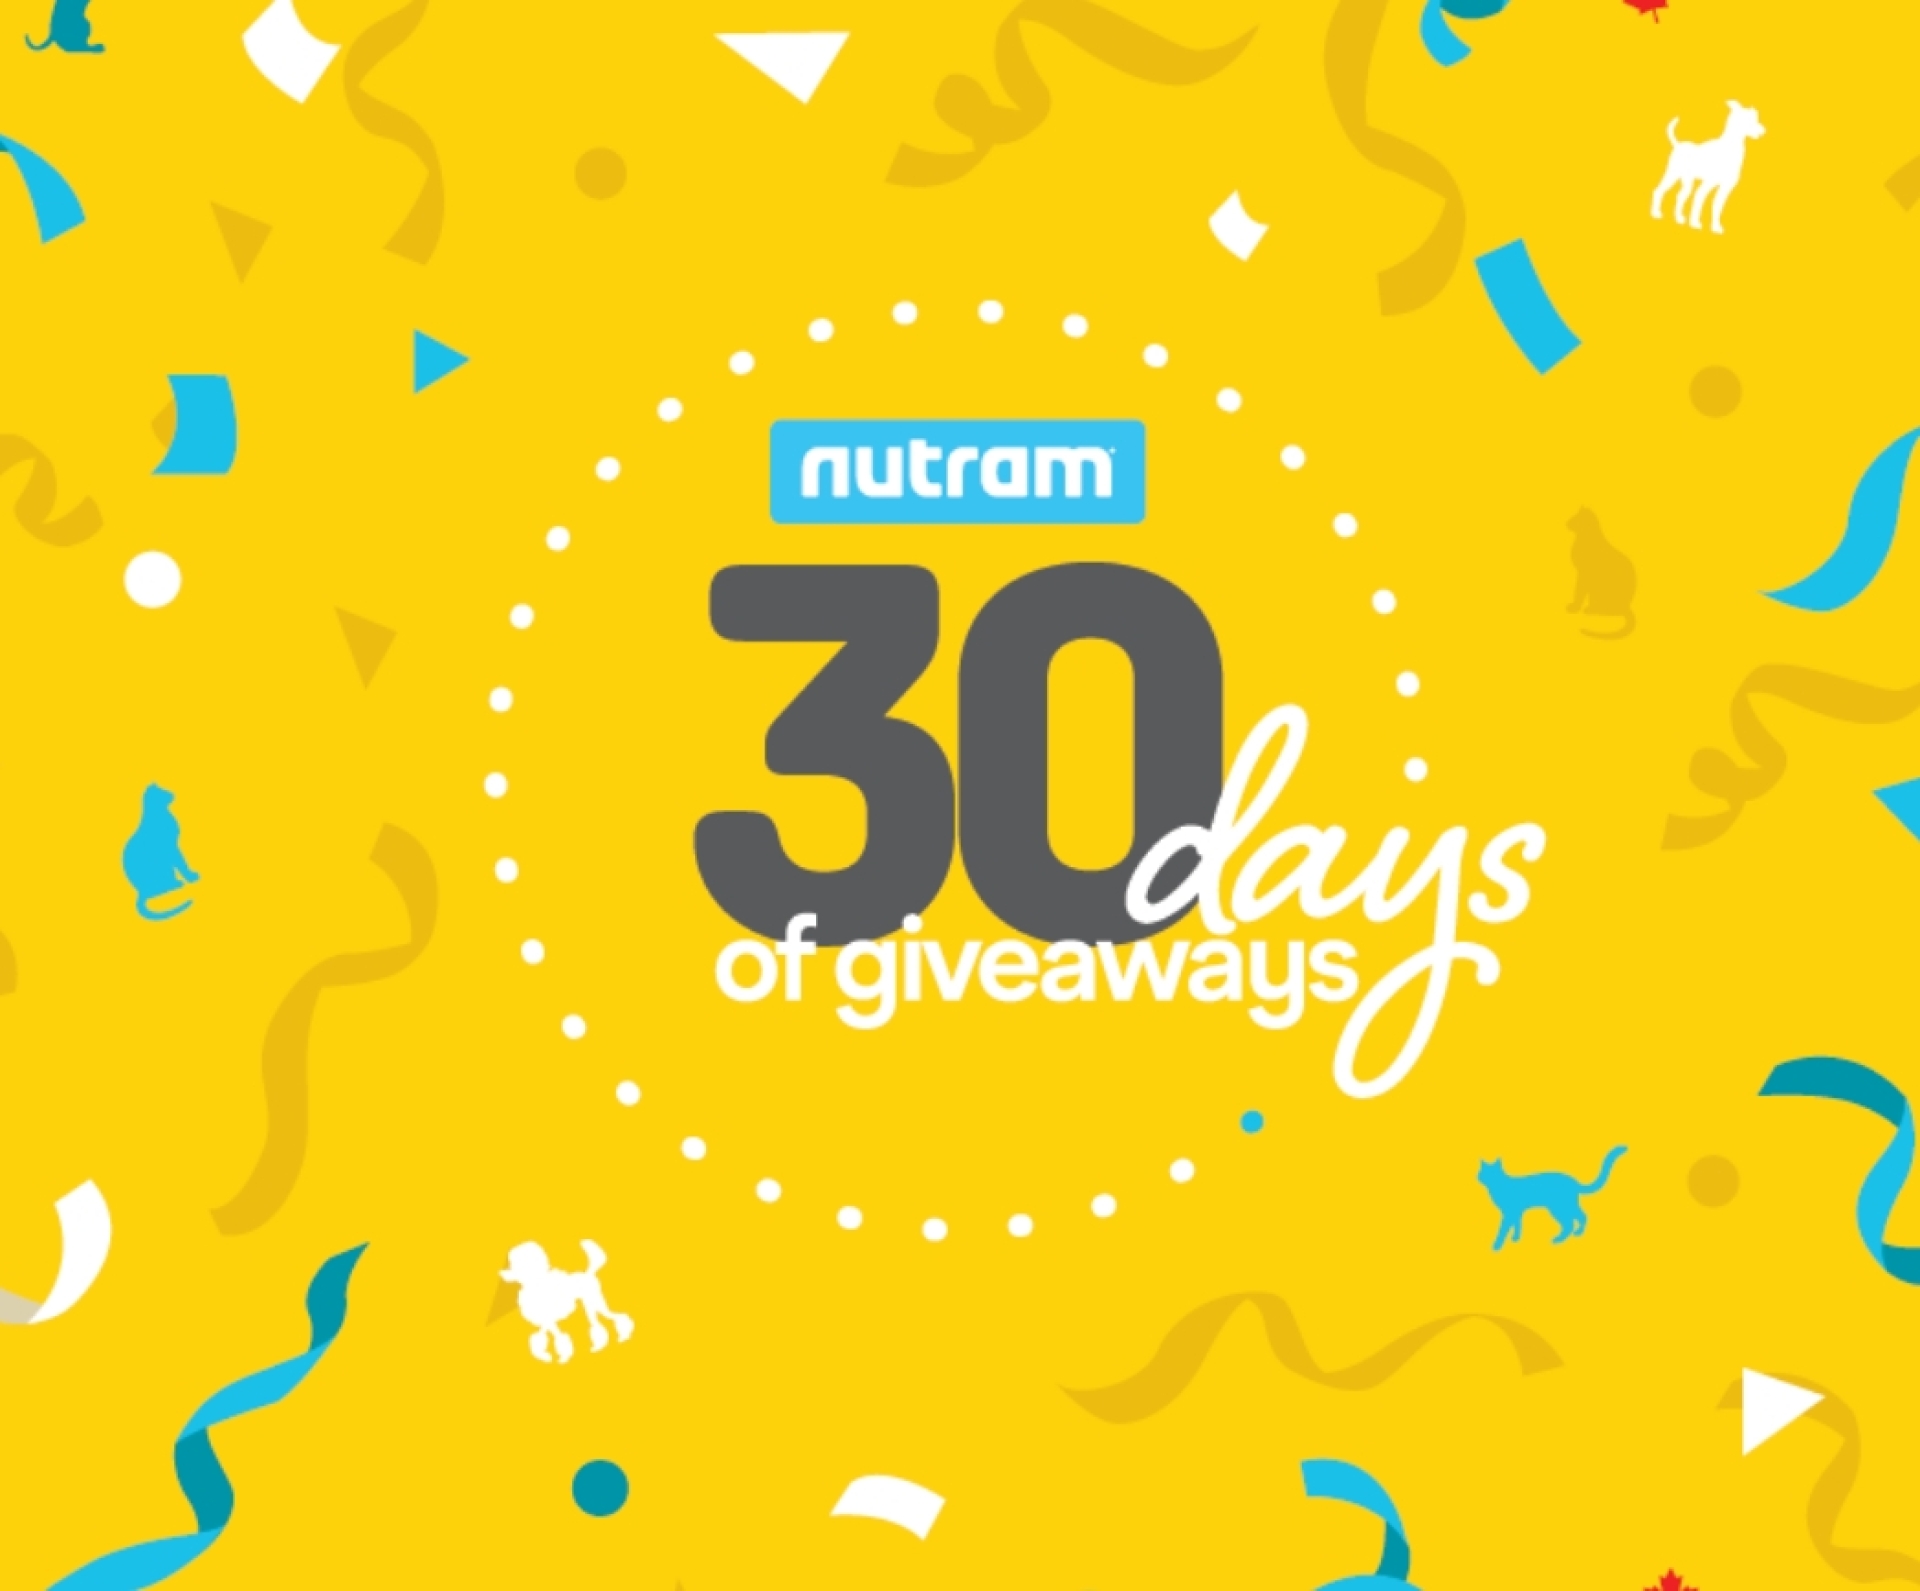 Nutram 30 days of giveaways creative marketing campaign banner